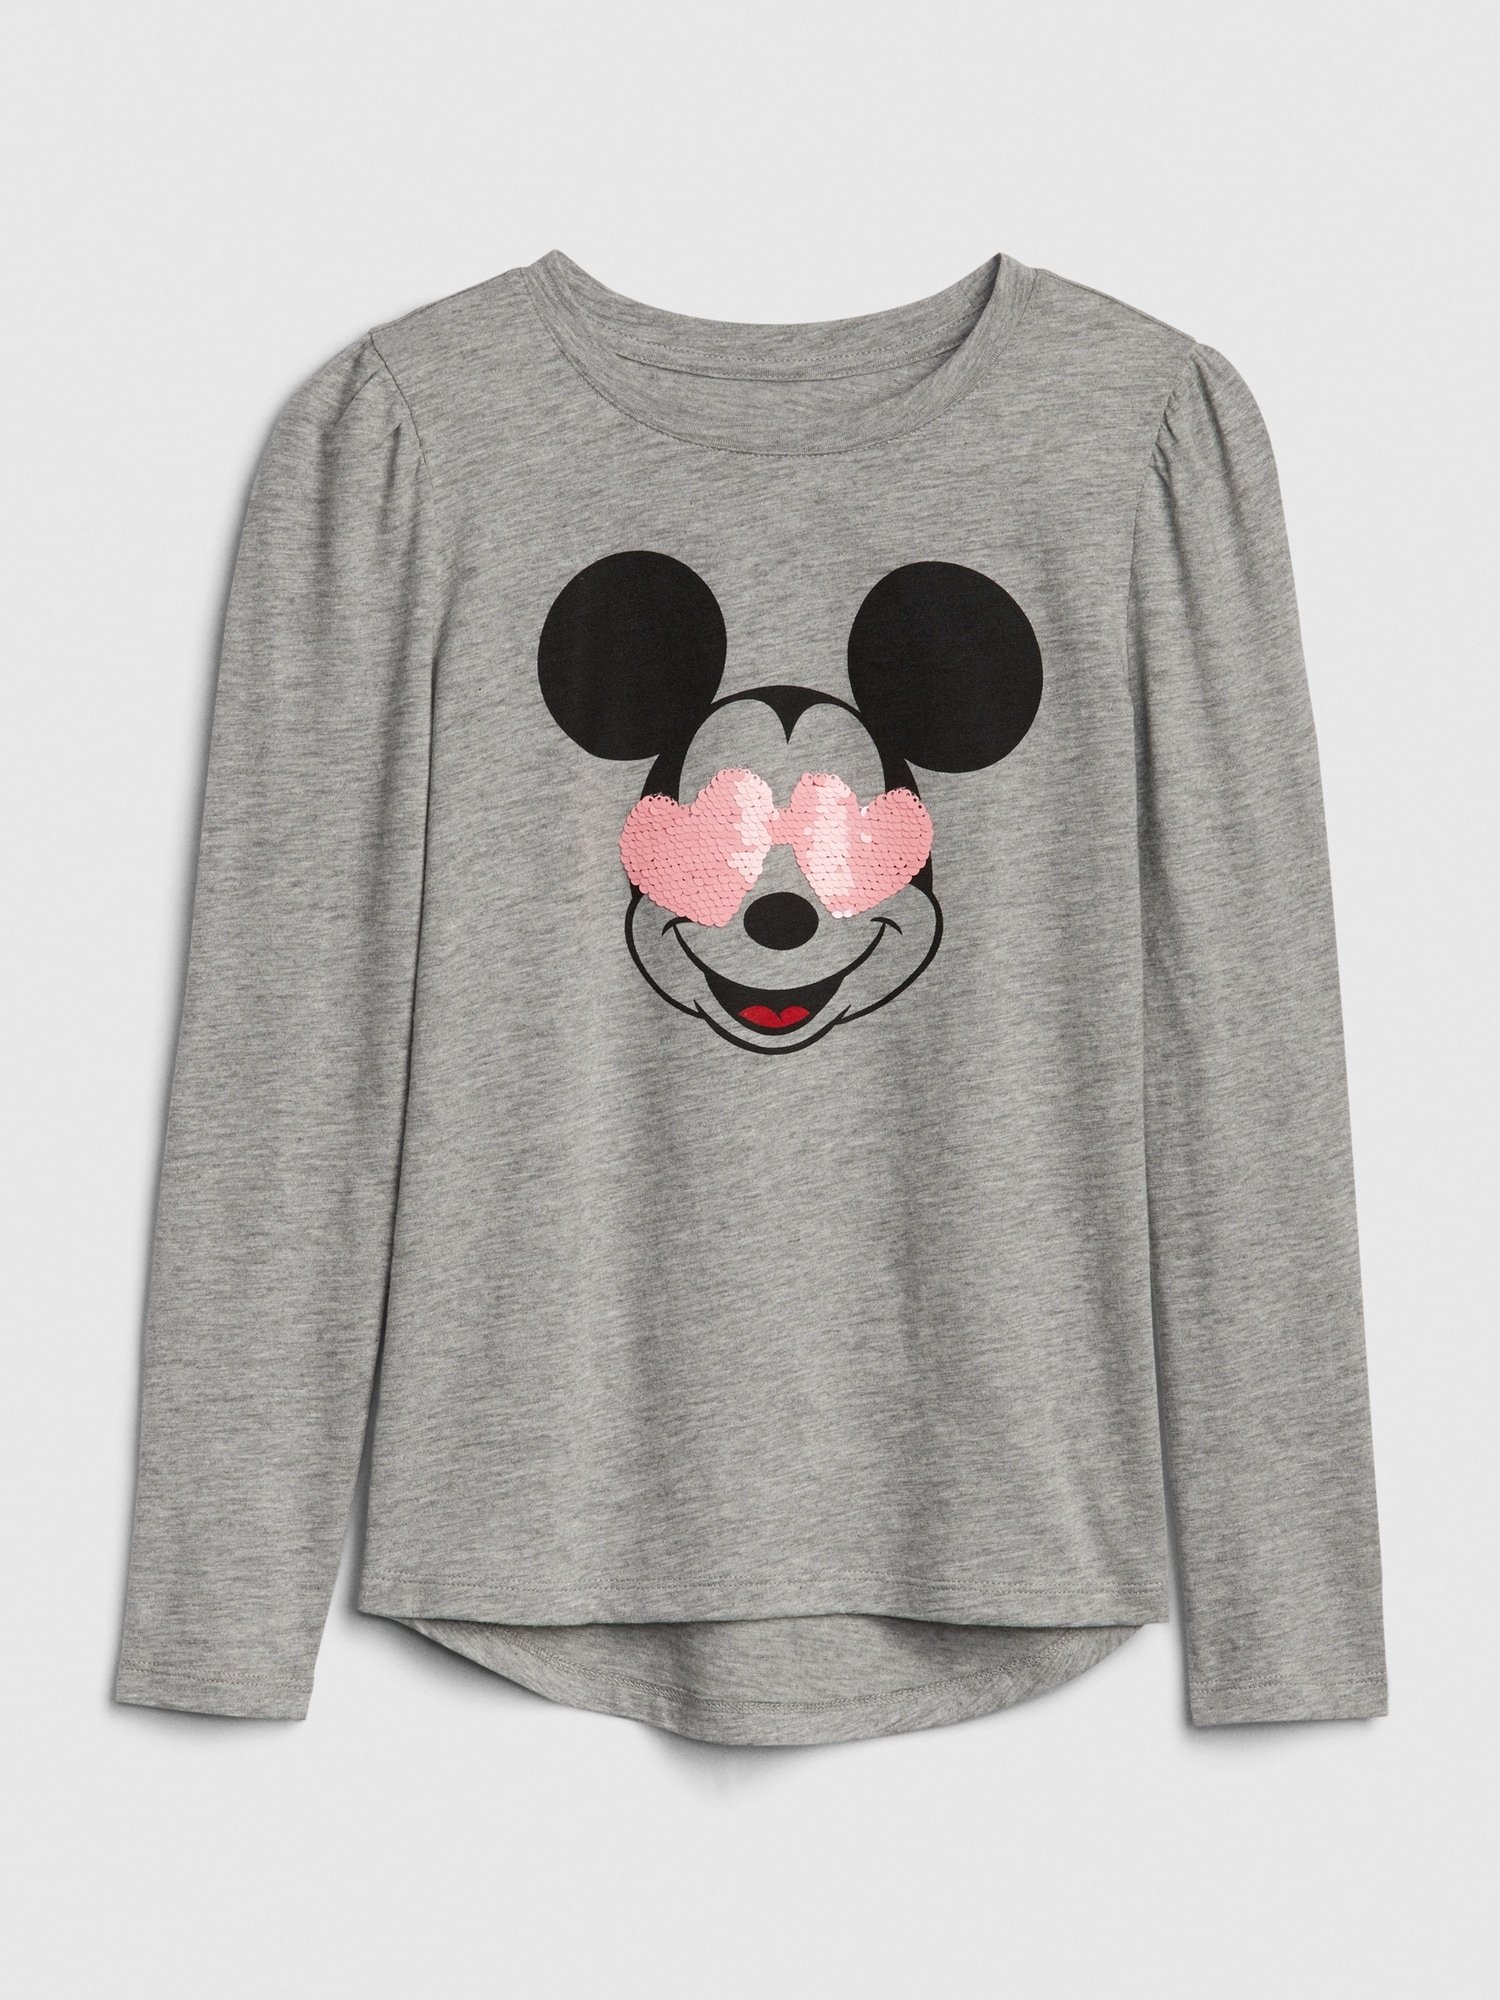 Disney Minnie Mouse and Mickey Mouse T-Shirt product image